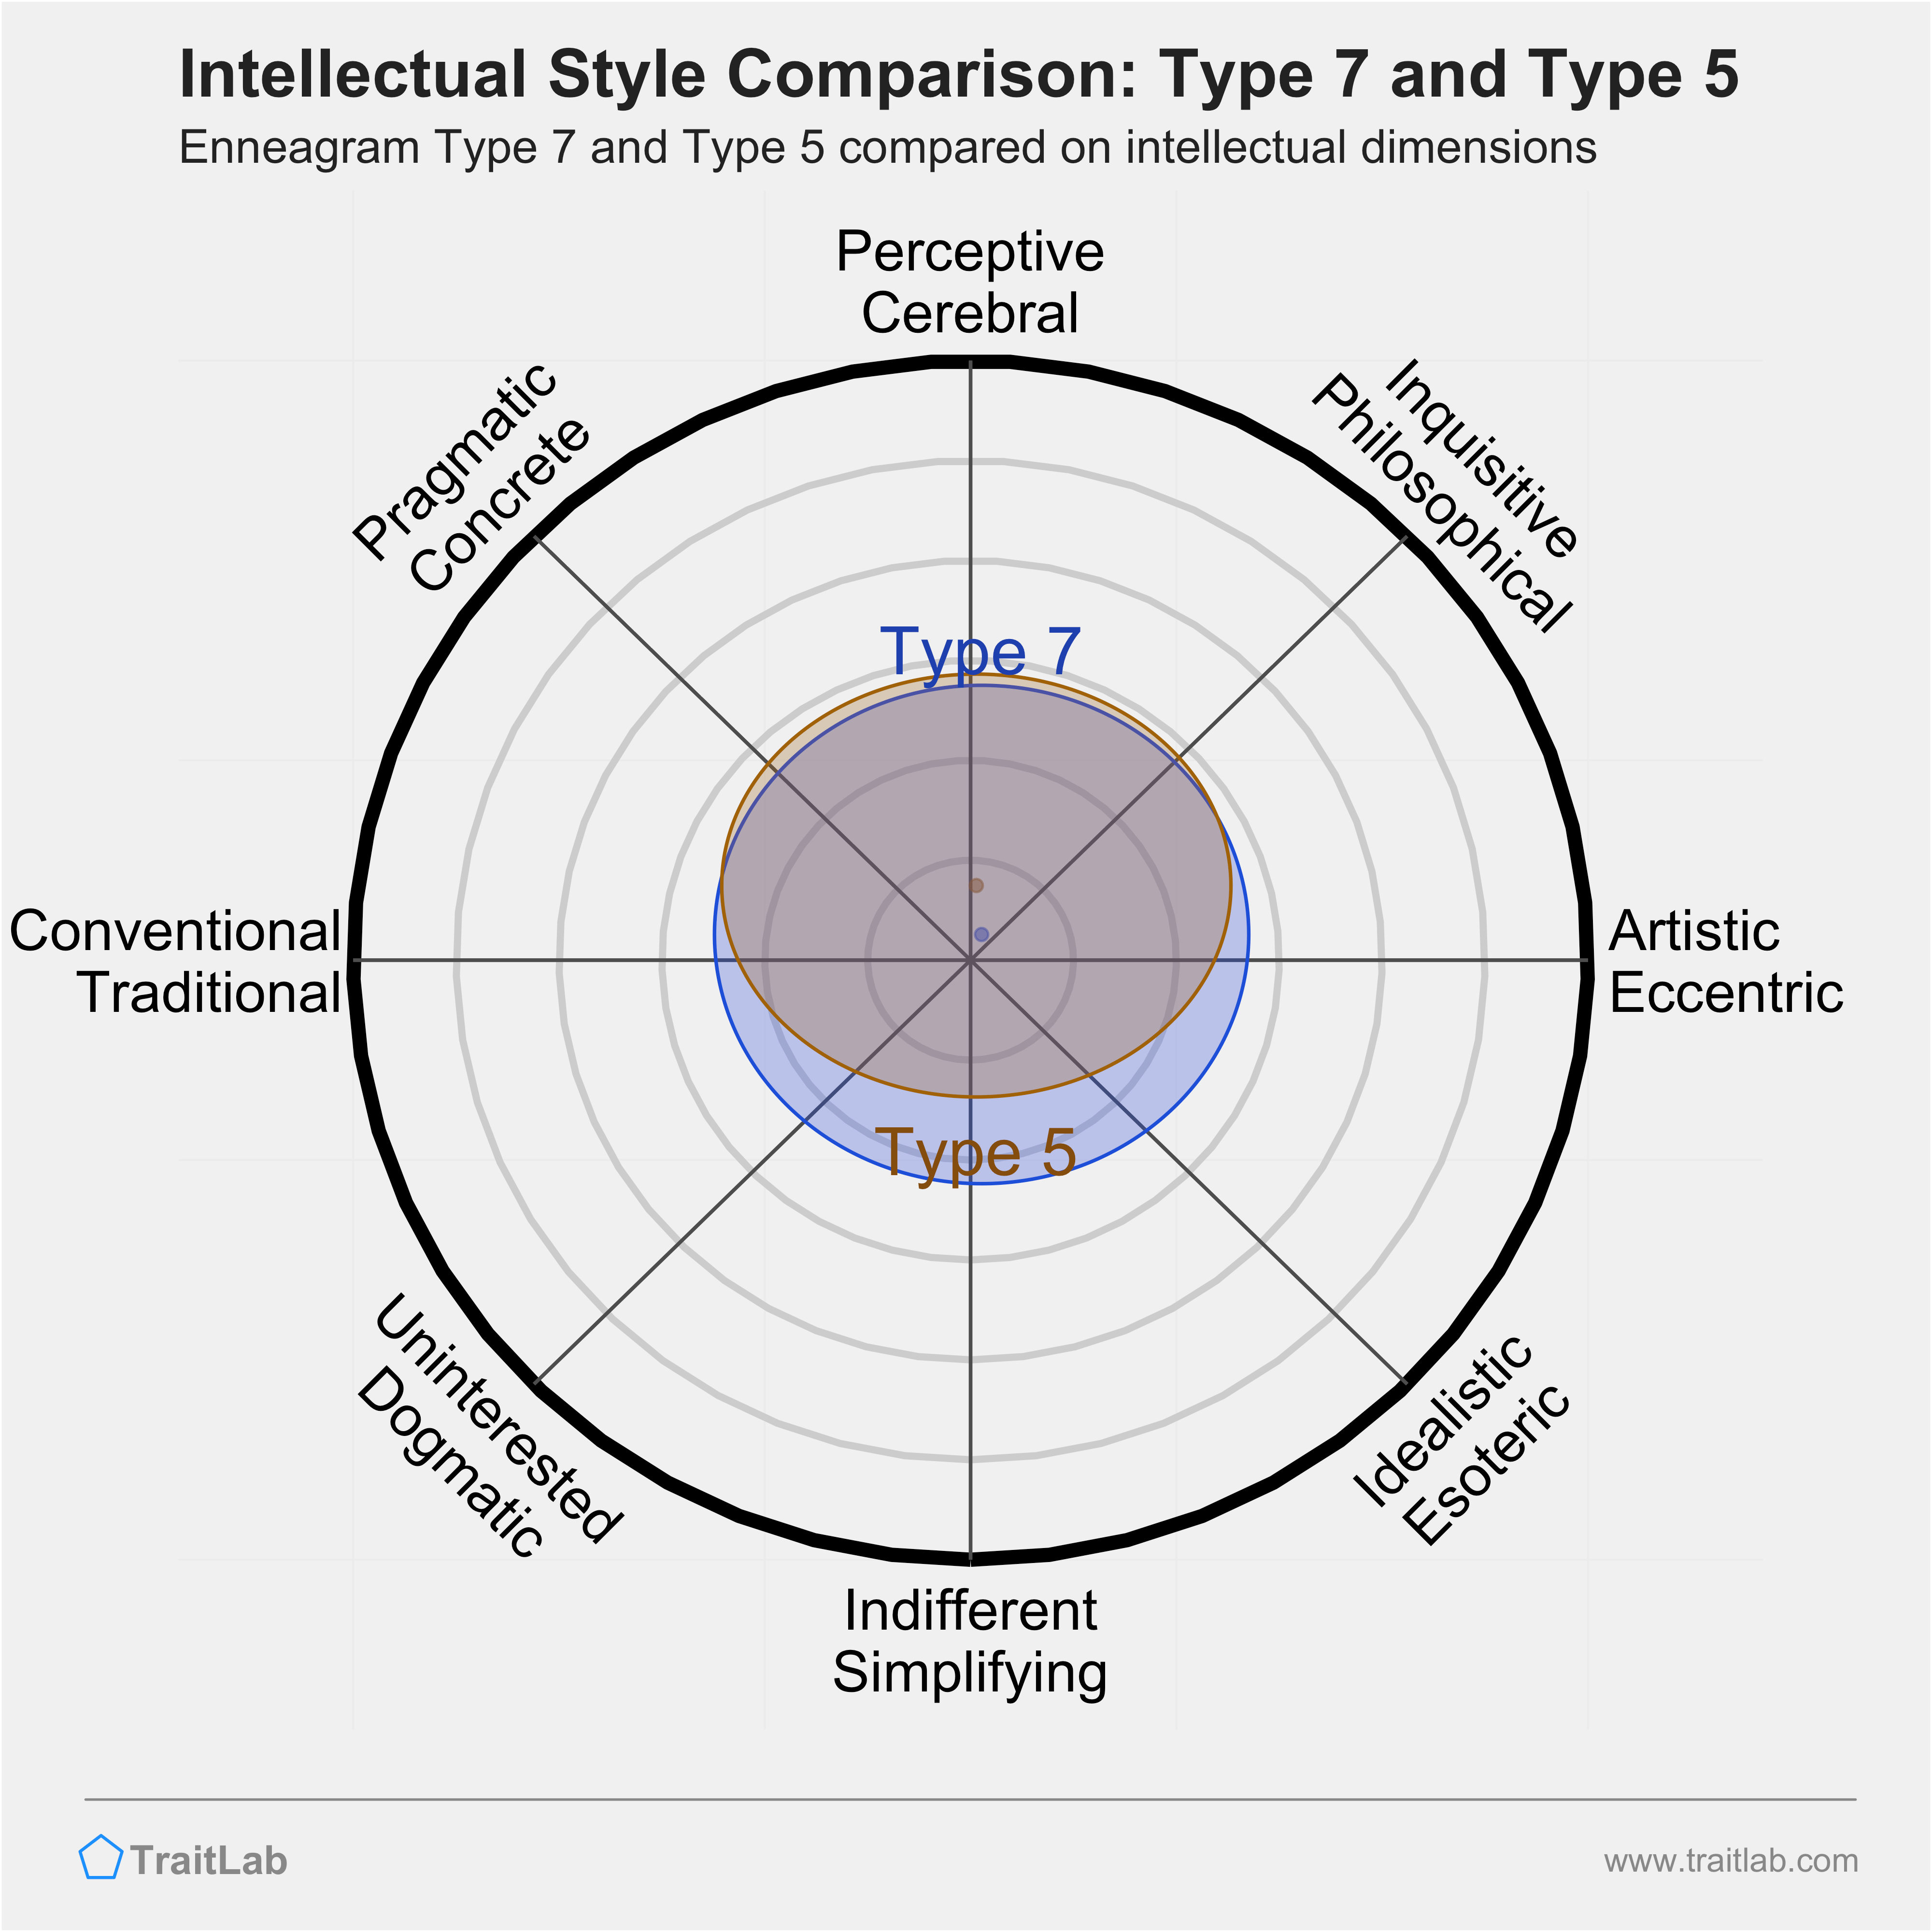 Type 7 and Type 5 comparison across intellectual dimensions